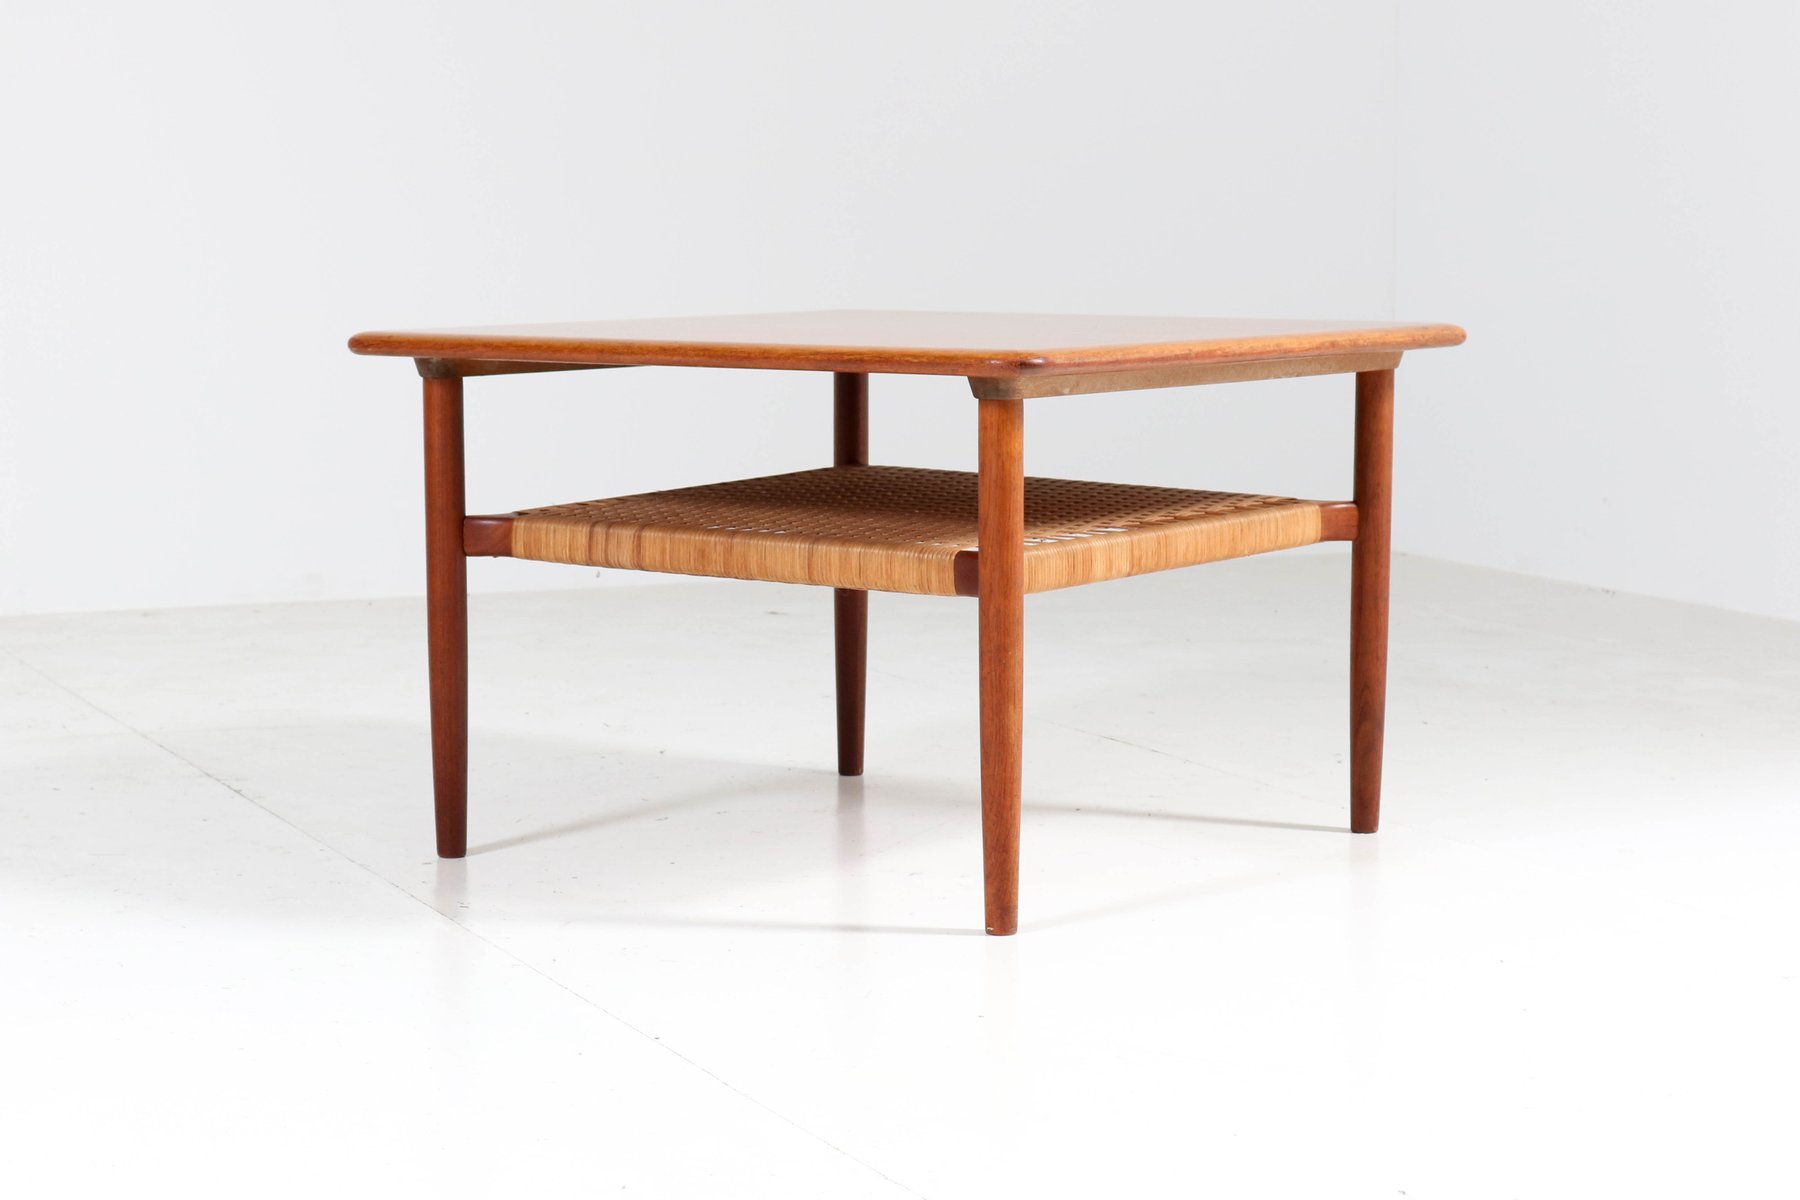 Teak Coffee Table by Gunnar Schwartz, 1960s for sale at Pamono